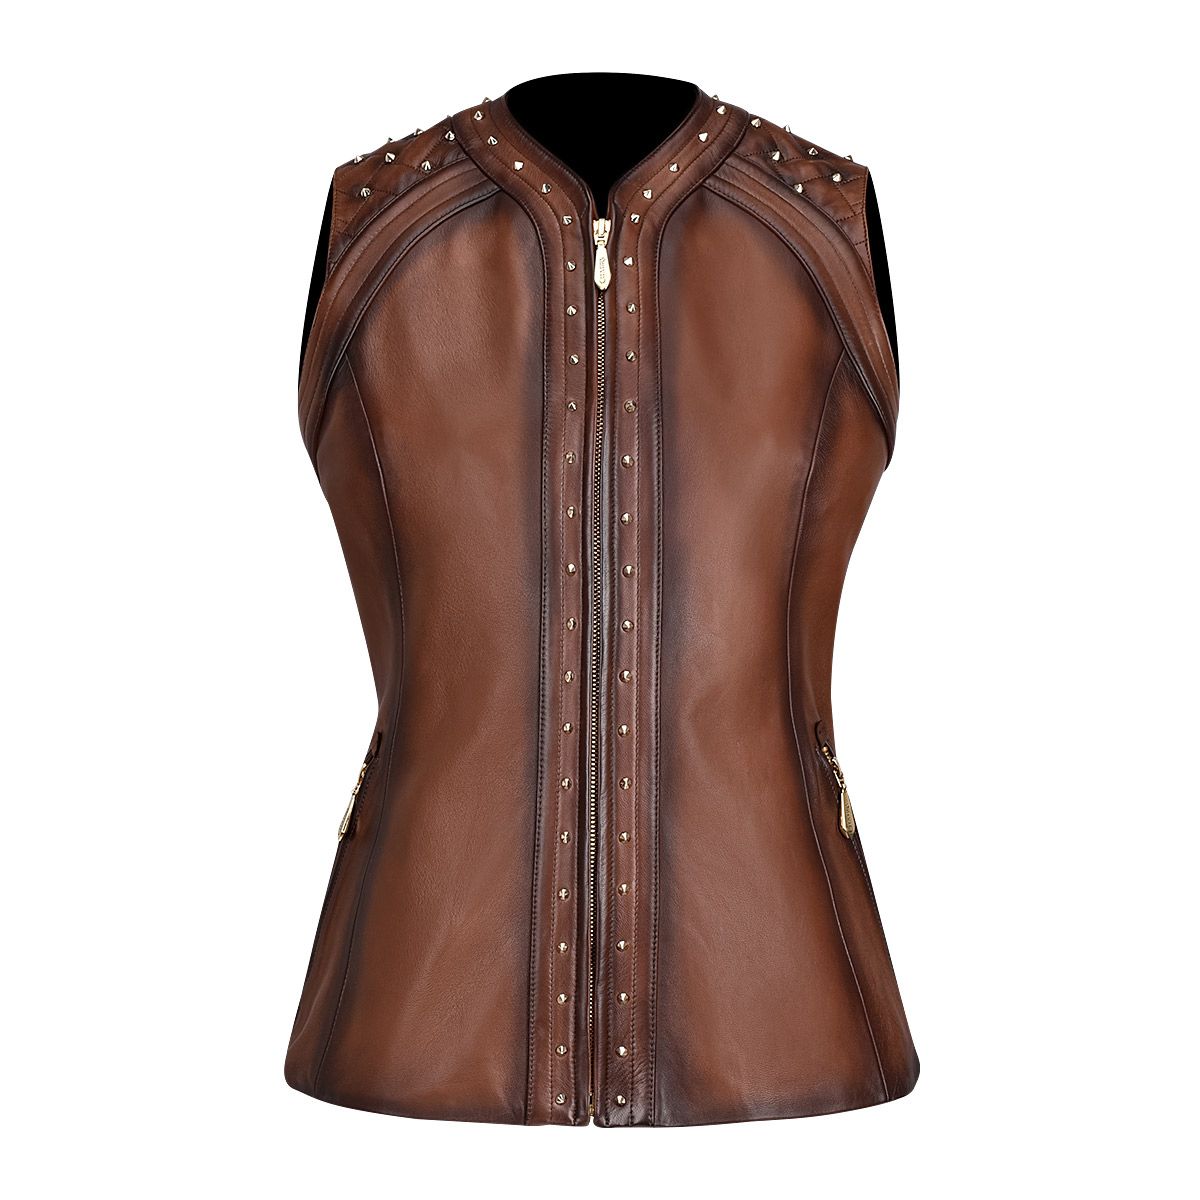 M289COC - Cuadra brown casual fashion leather vest for women-Kuet.us